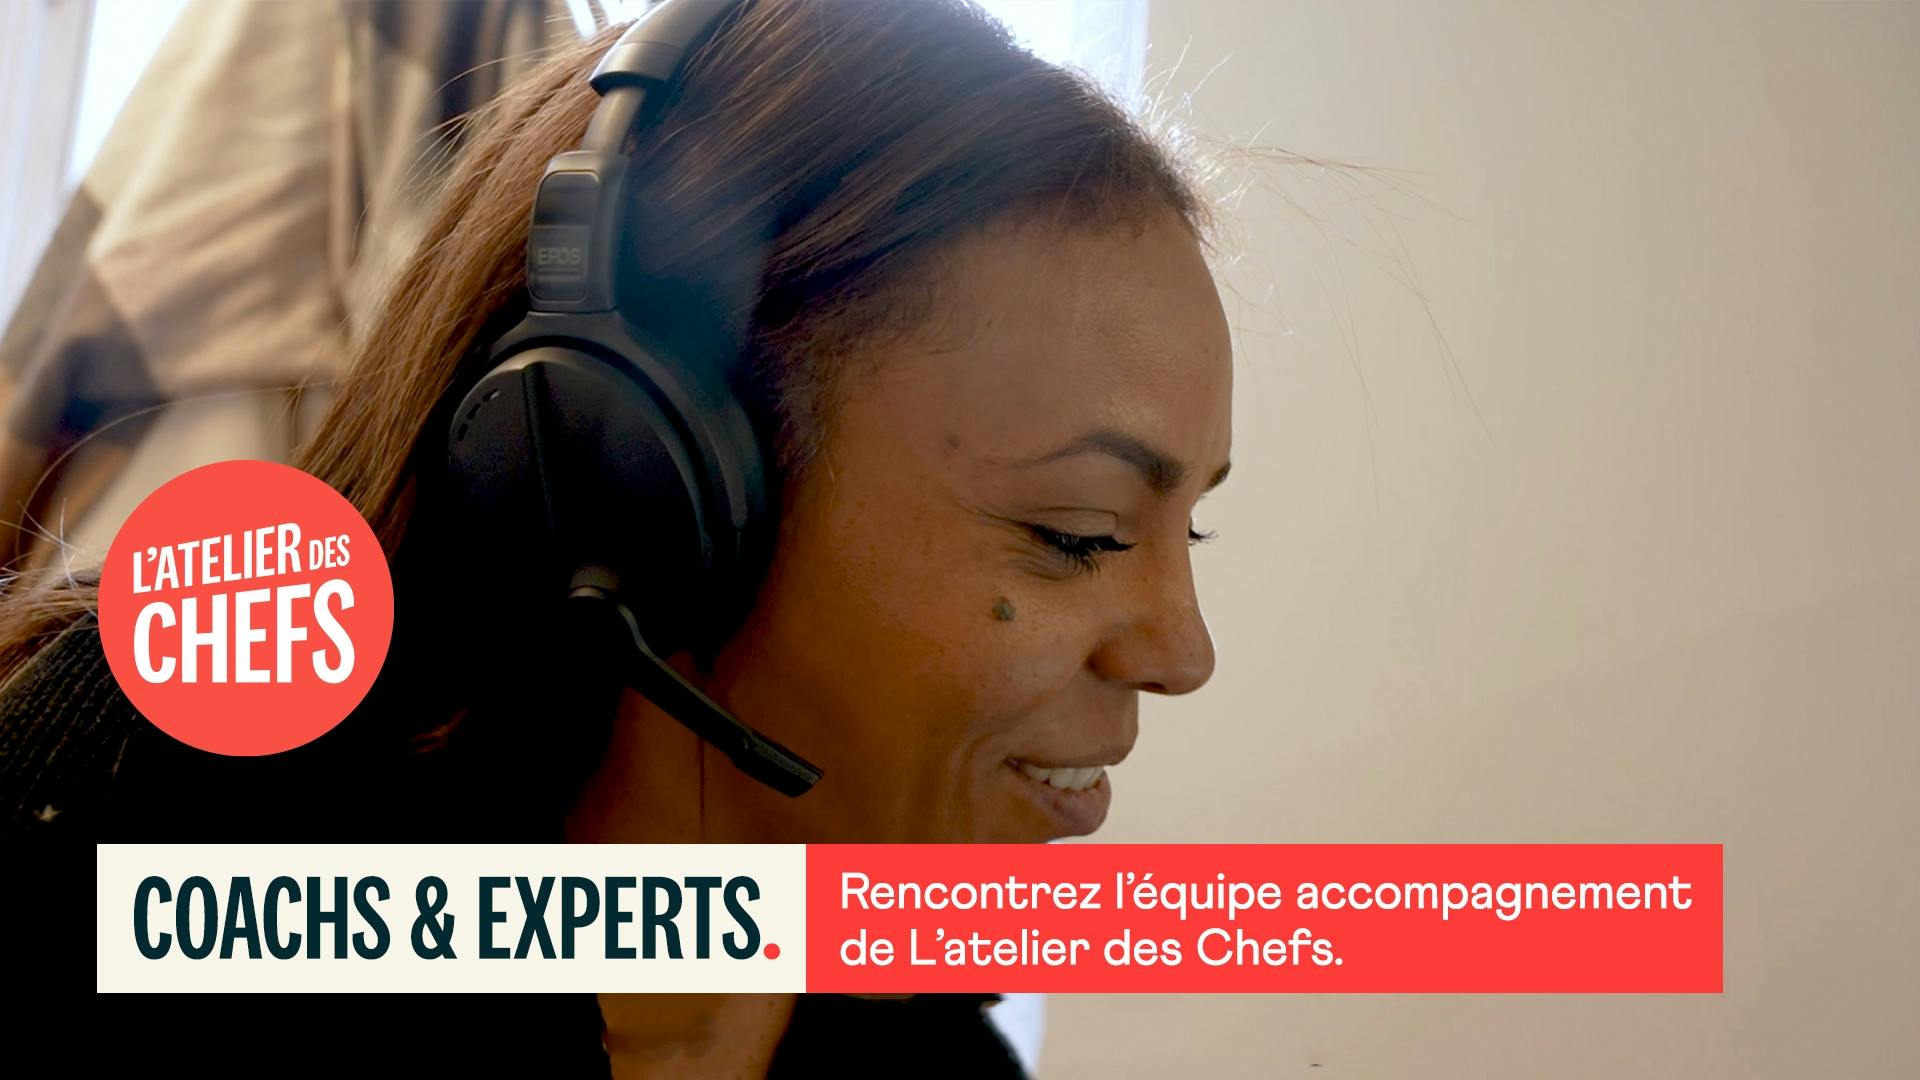 equipe-accompagnement-atelier-des-chefs